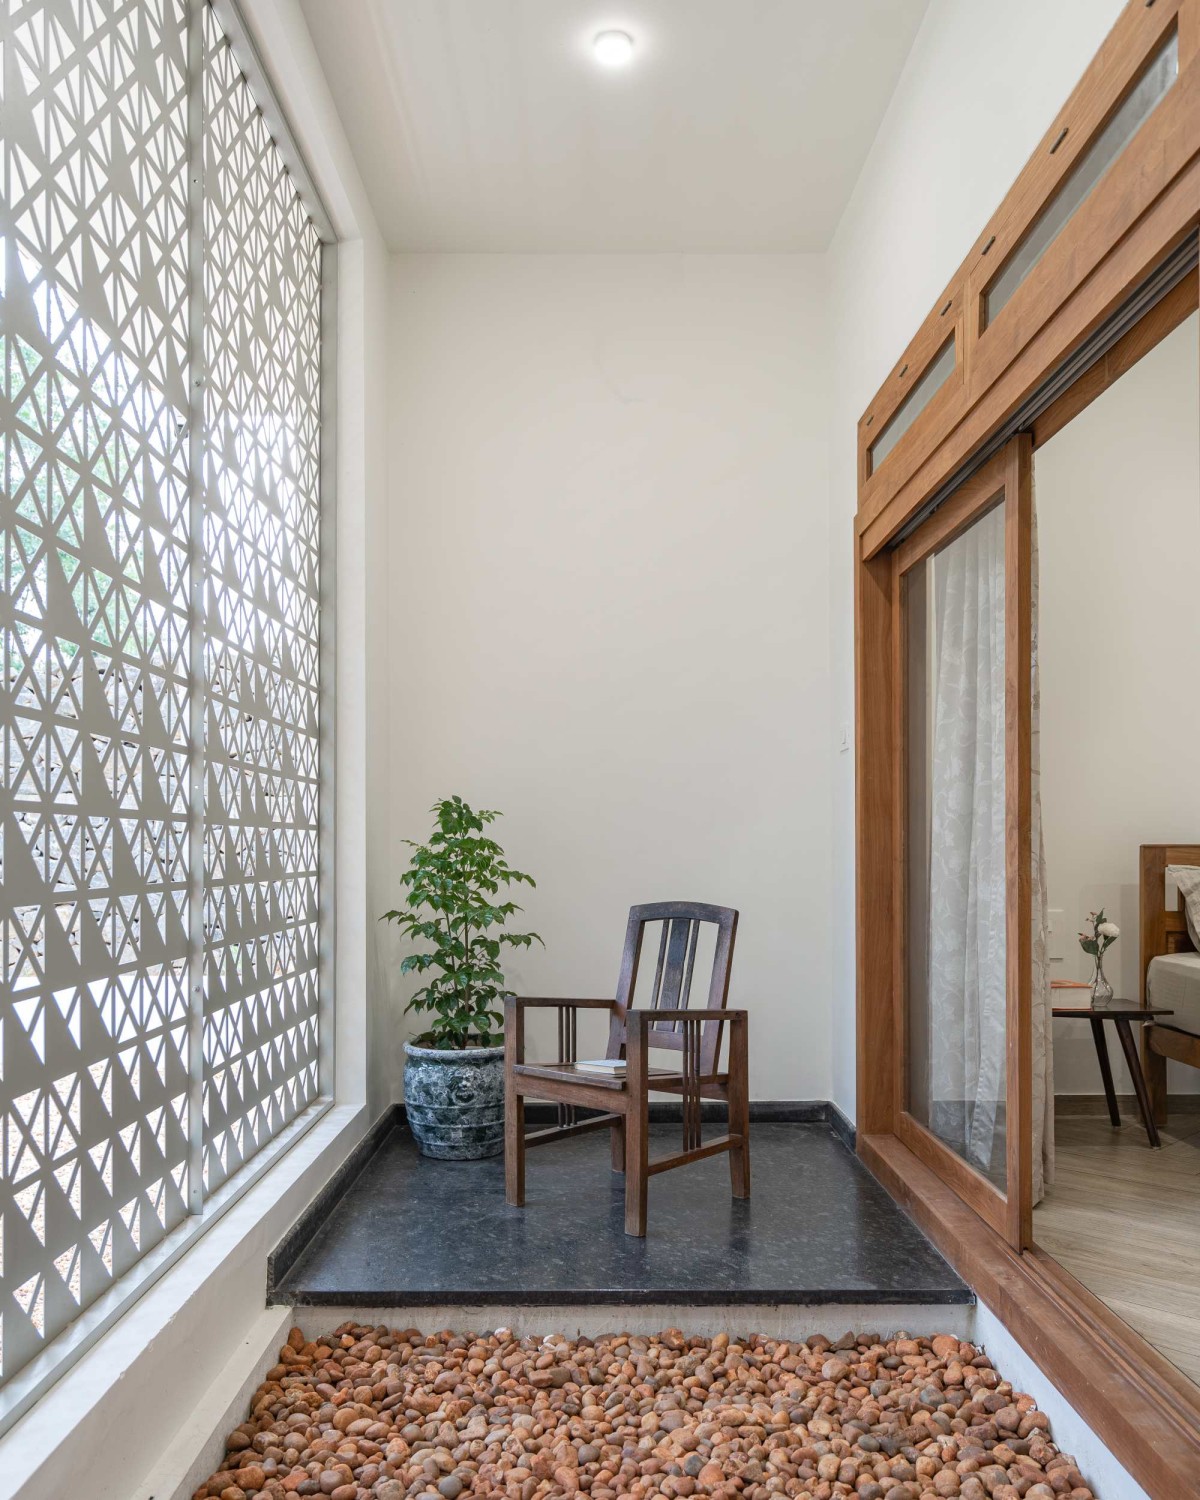 Seating area at court connected to bedroom of Arackal Madom by In Between Space Architects